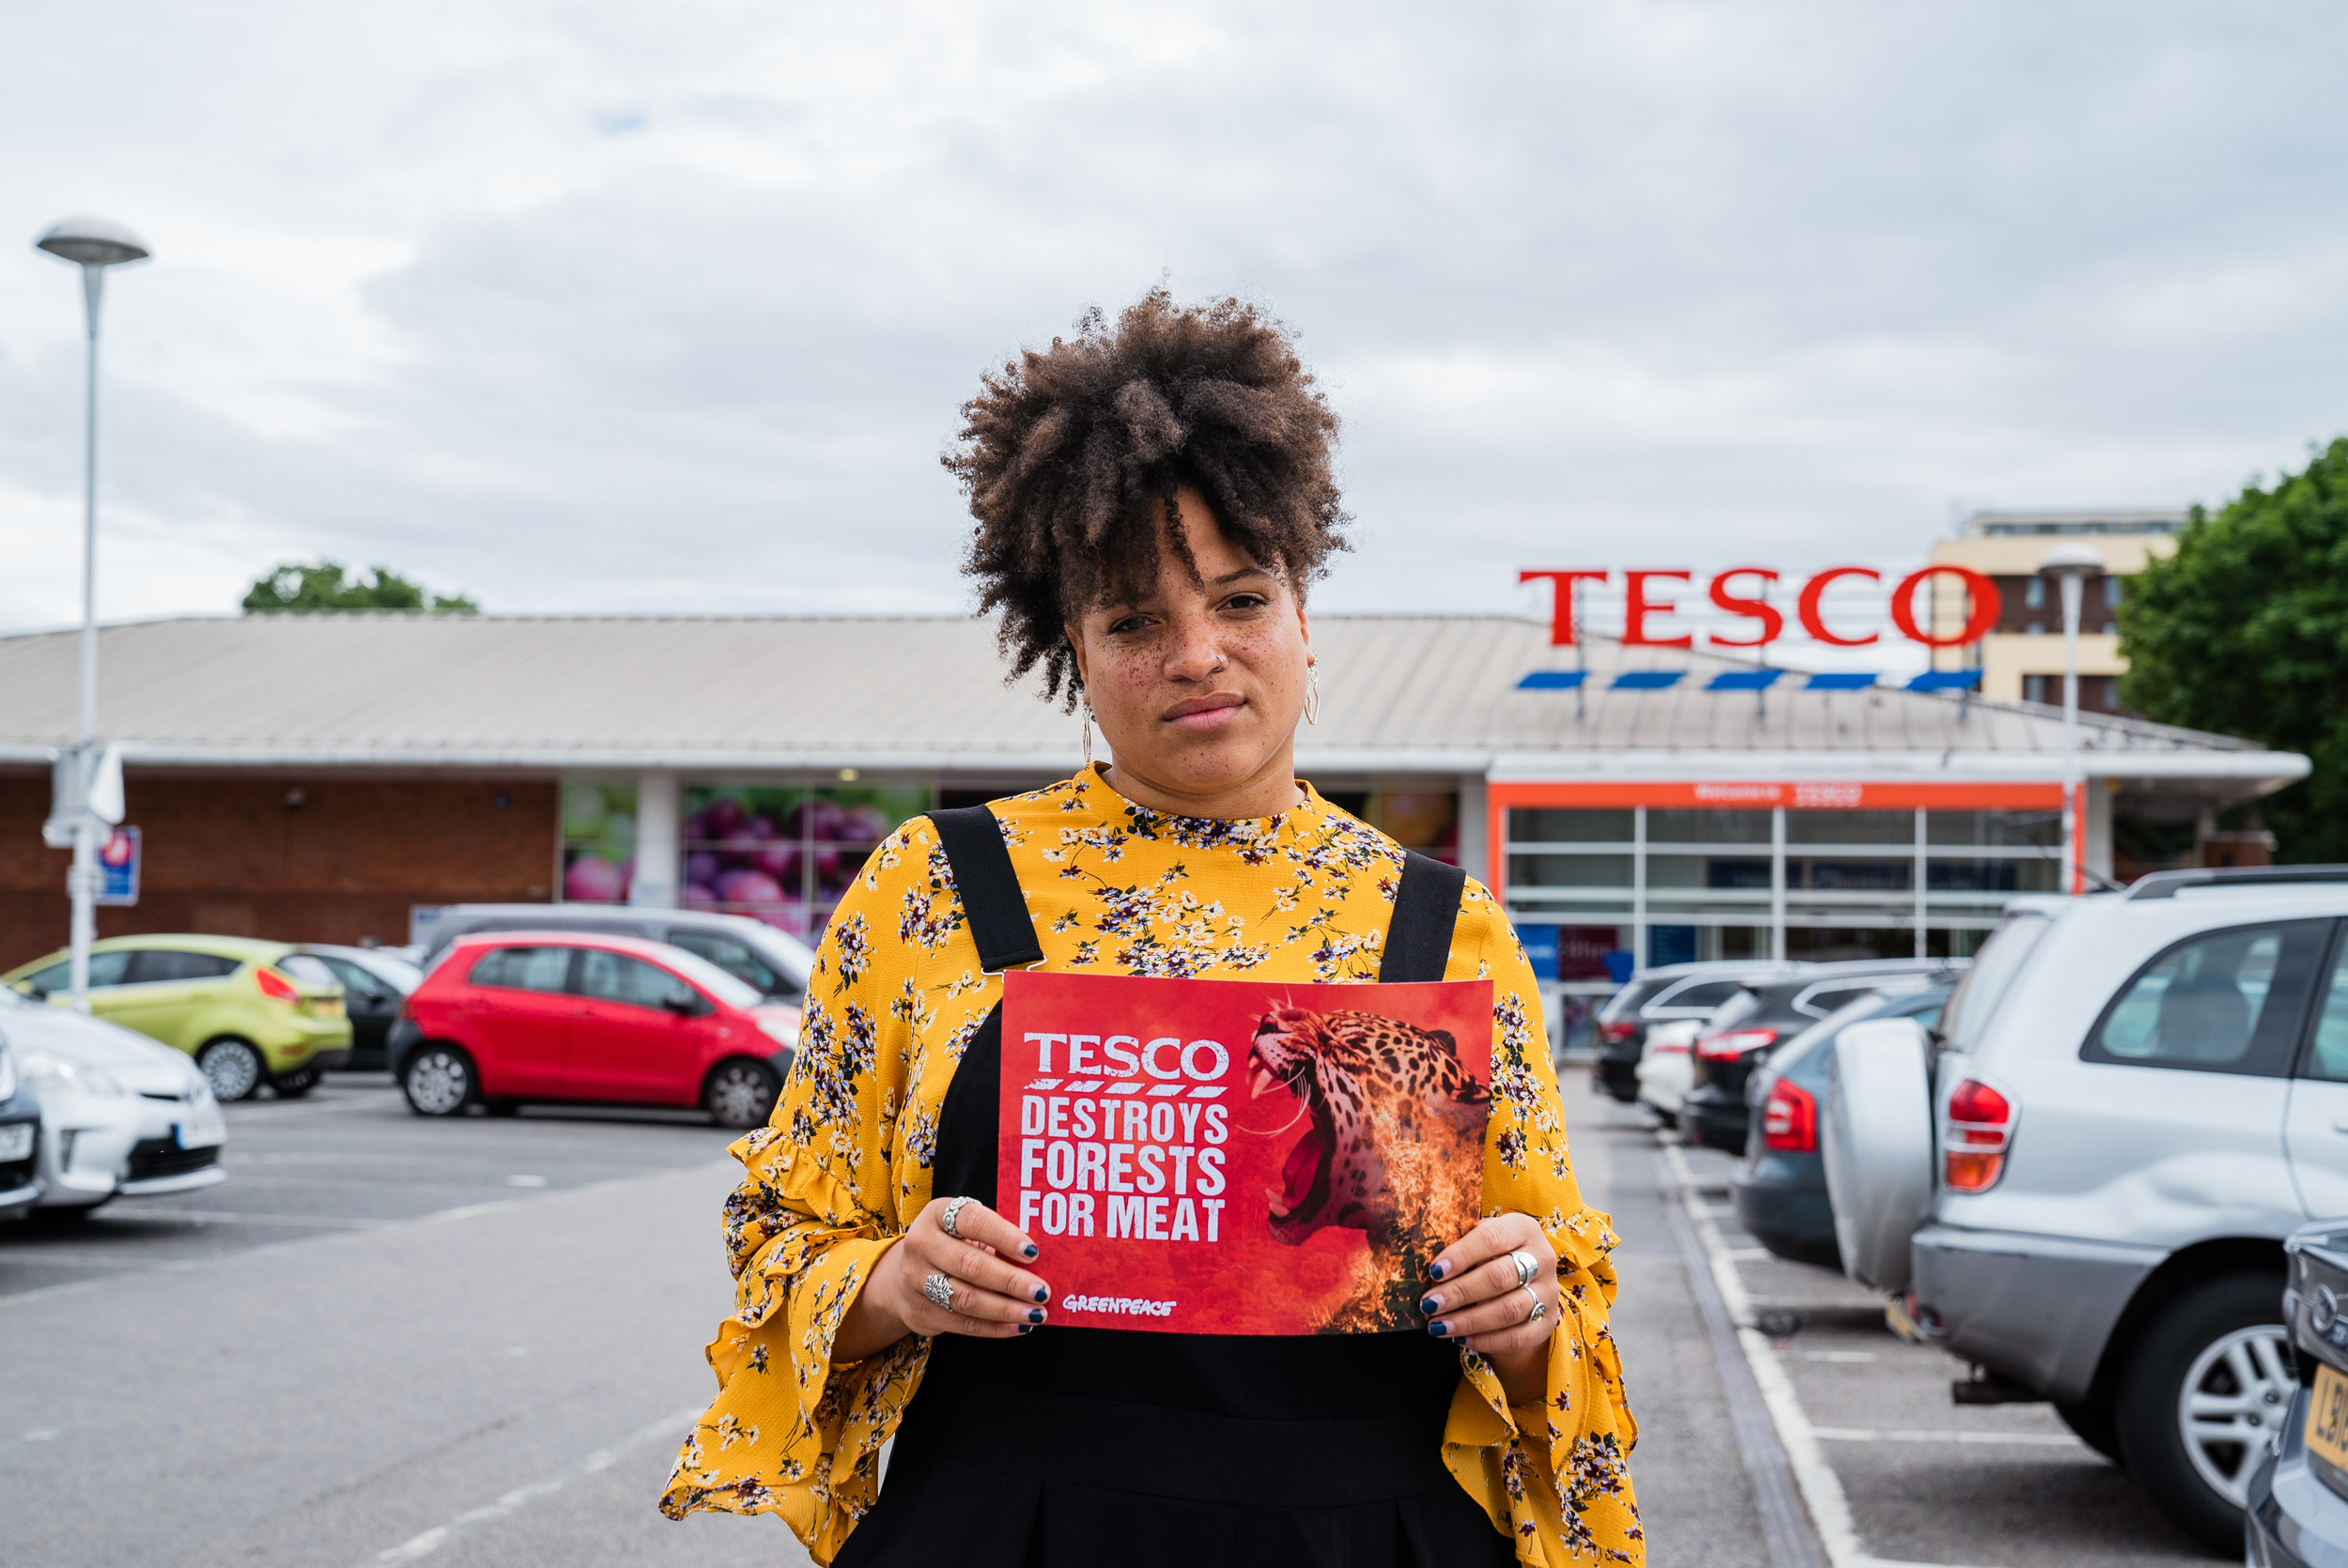 Laya Lewis stands outside the supermarket, Tesco, holding a sign that says 